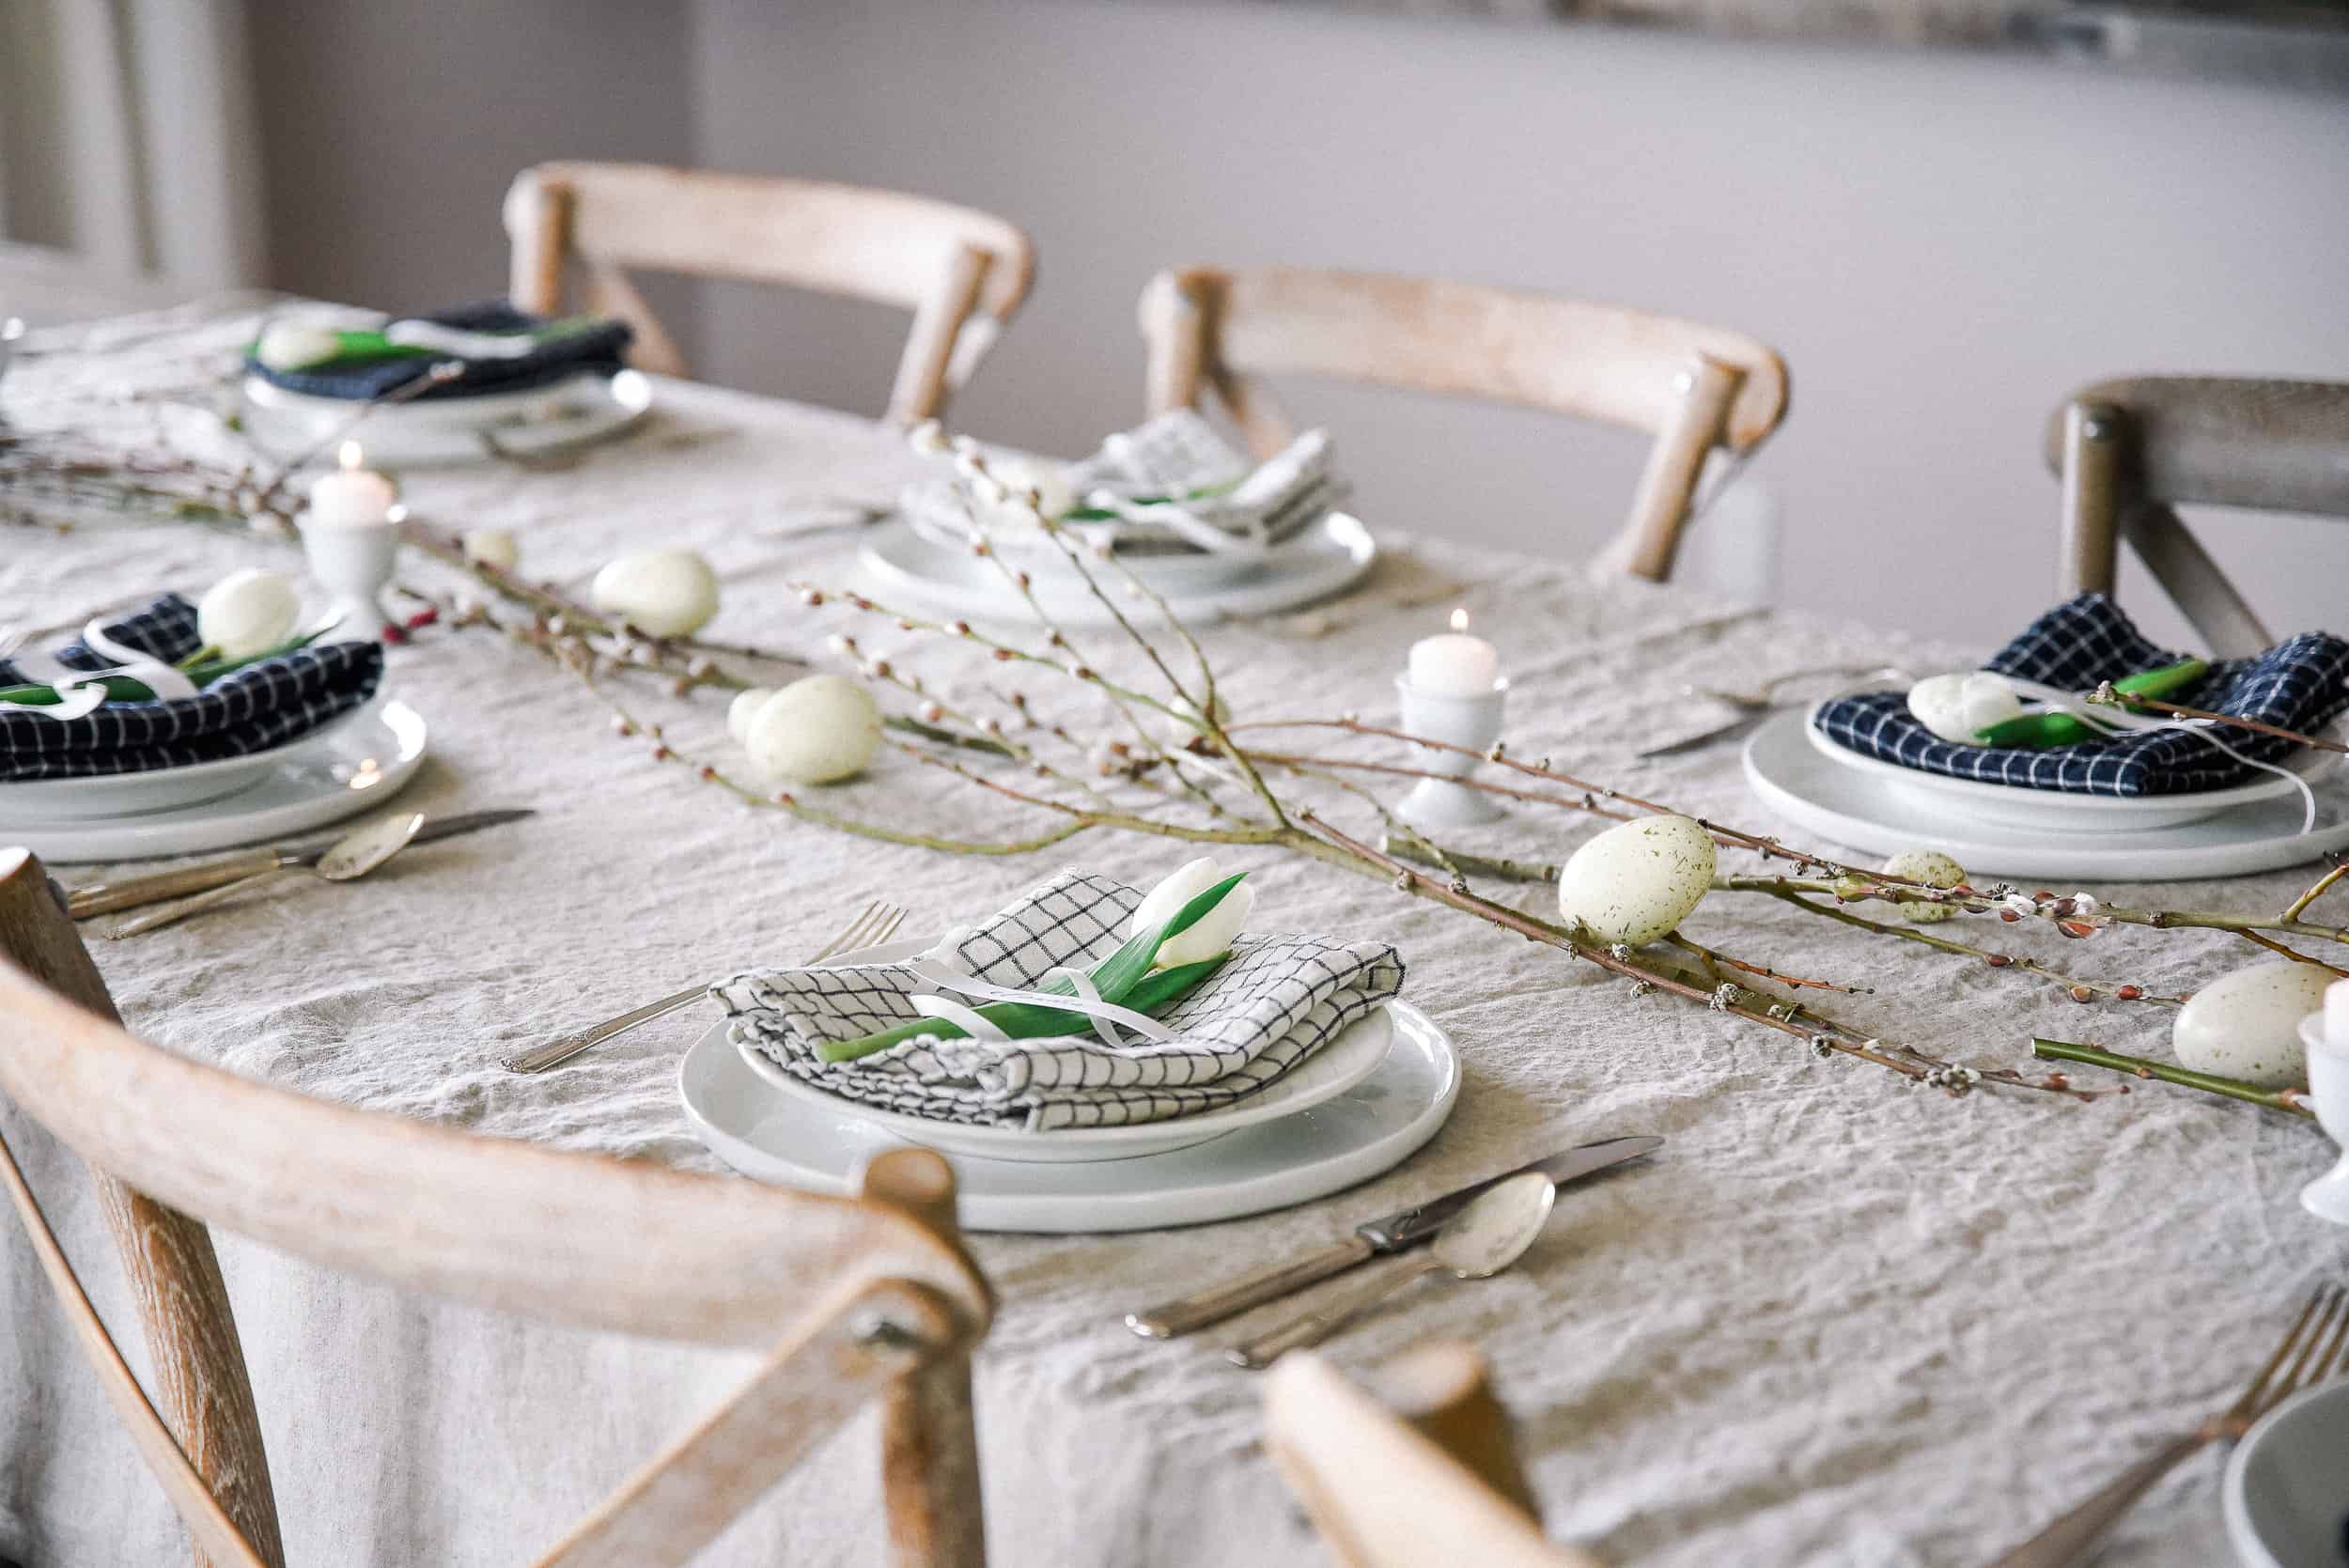 Get inspired to decorate for Easter this year with these easy Easter decorating ideas! This Easter table is beautiful and perfect for an Easter lunch with family or friends.